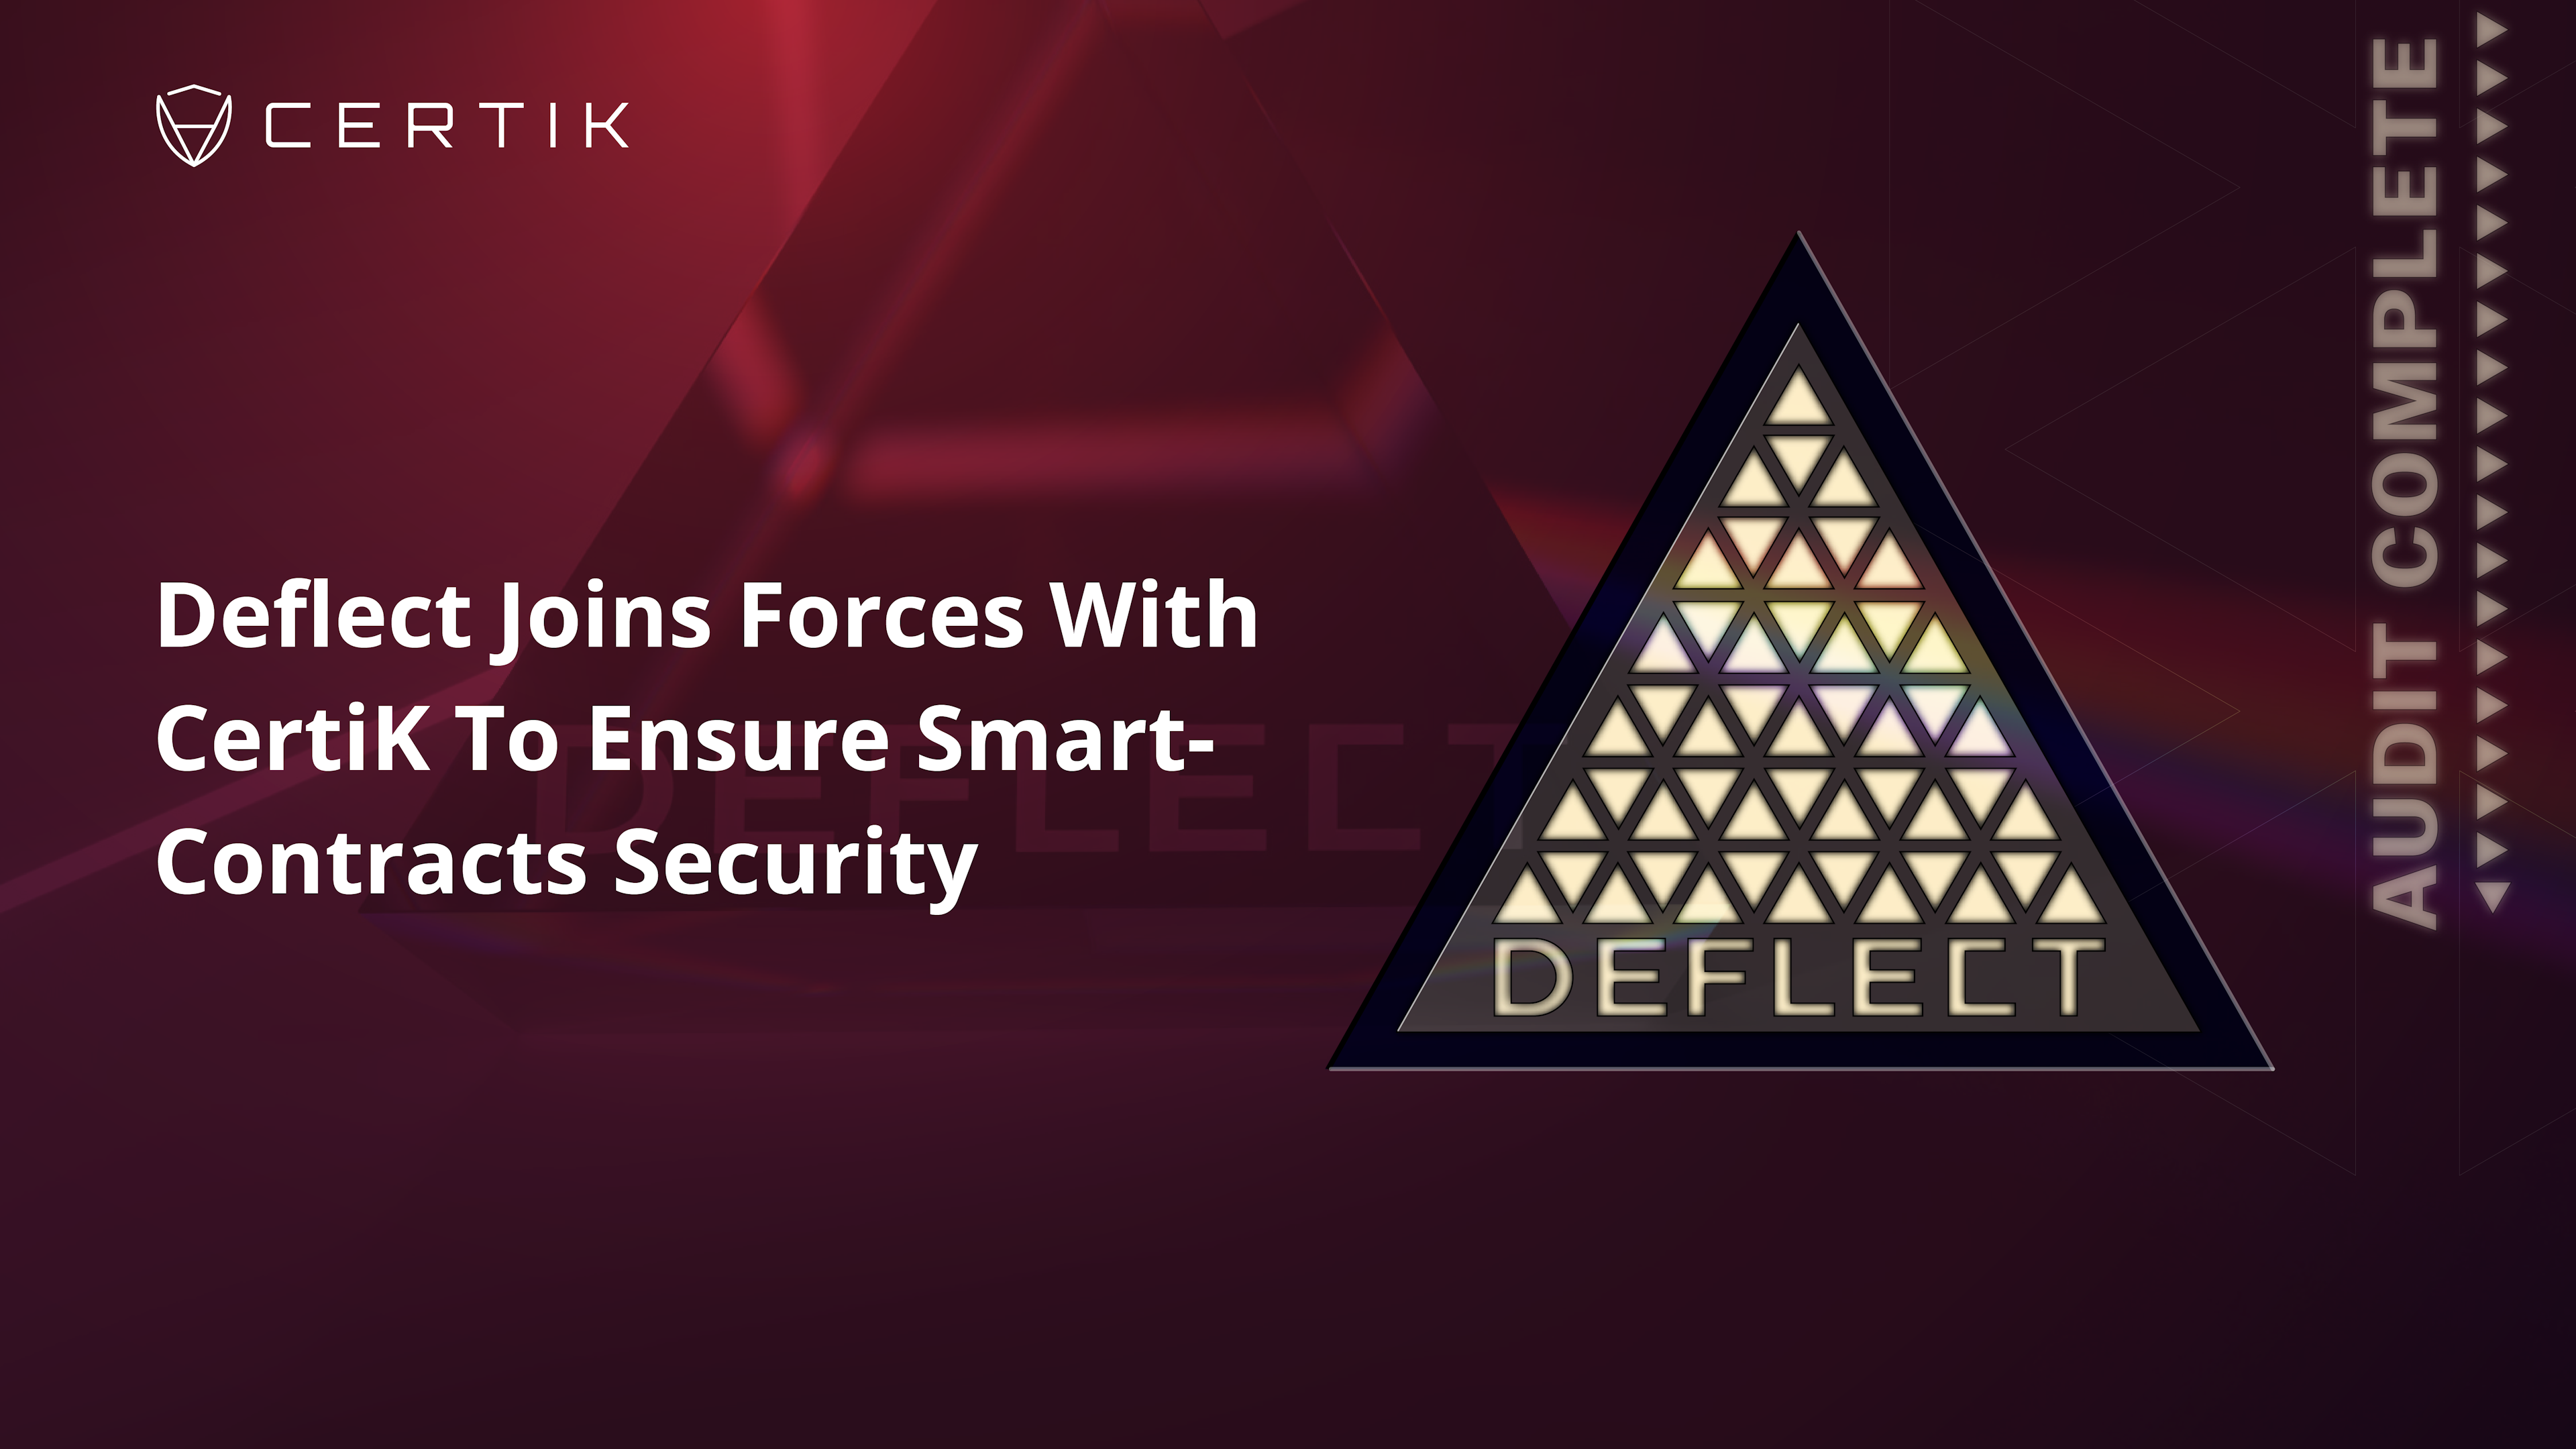 Deflect Joins Forces With CertiK To Ensure Smart-Contracts Security